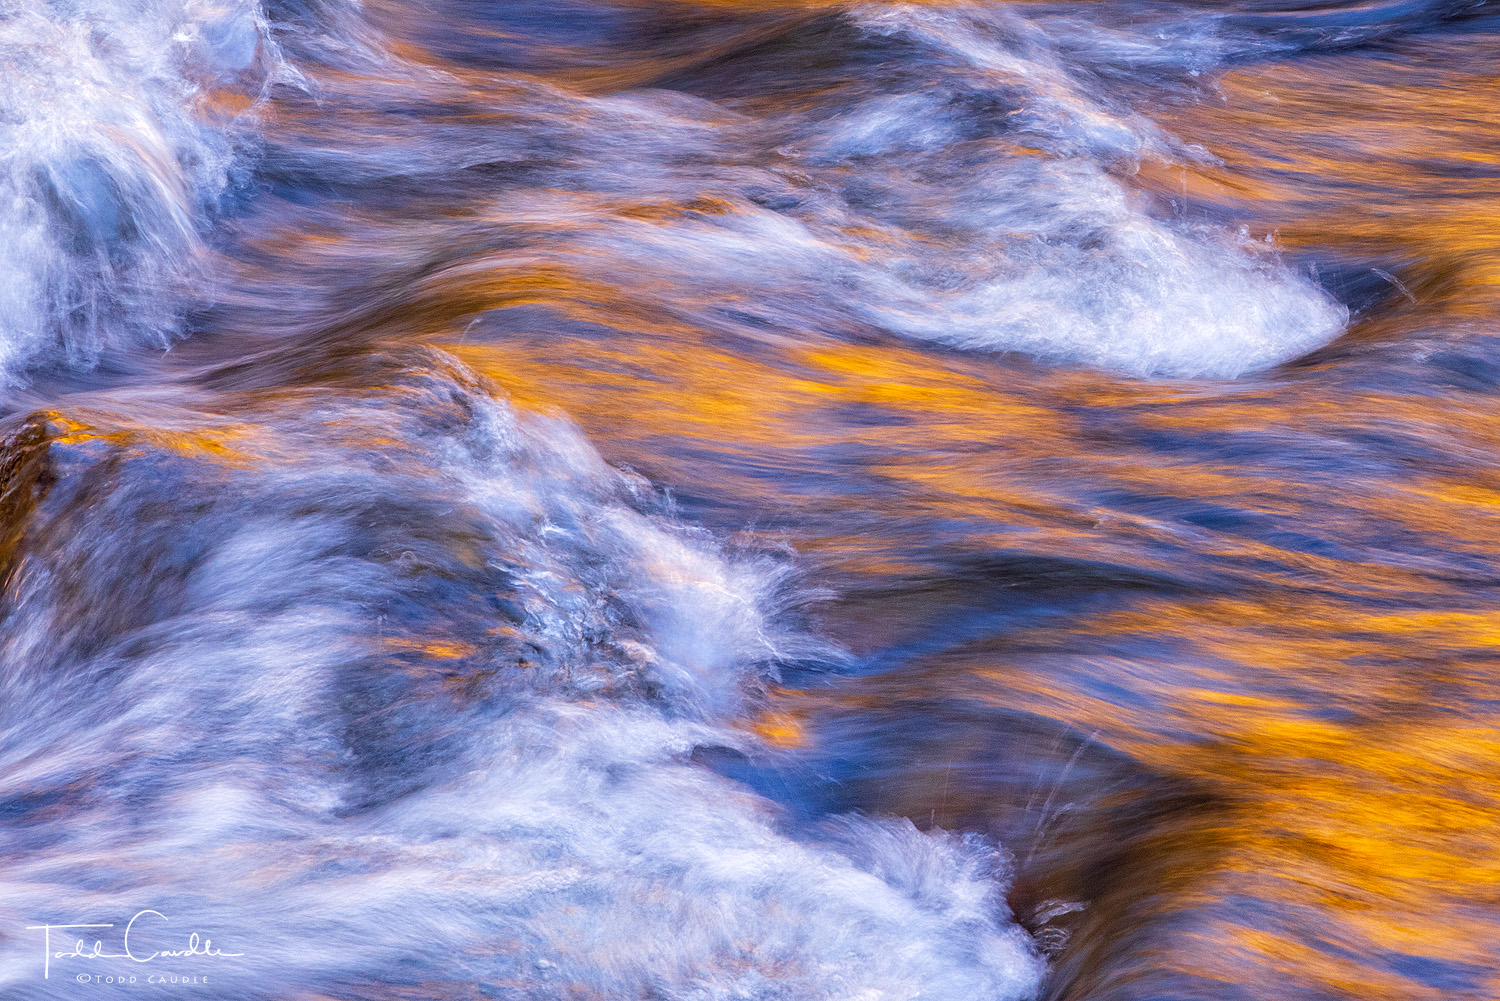 Fall colors reflect in rushing waters of Clear Creek.